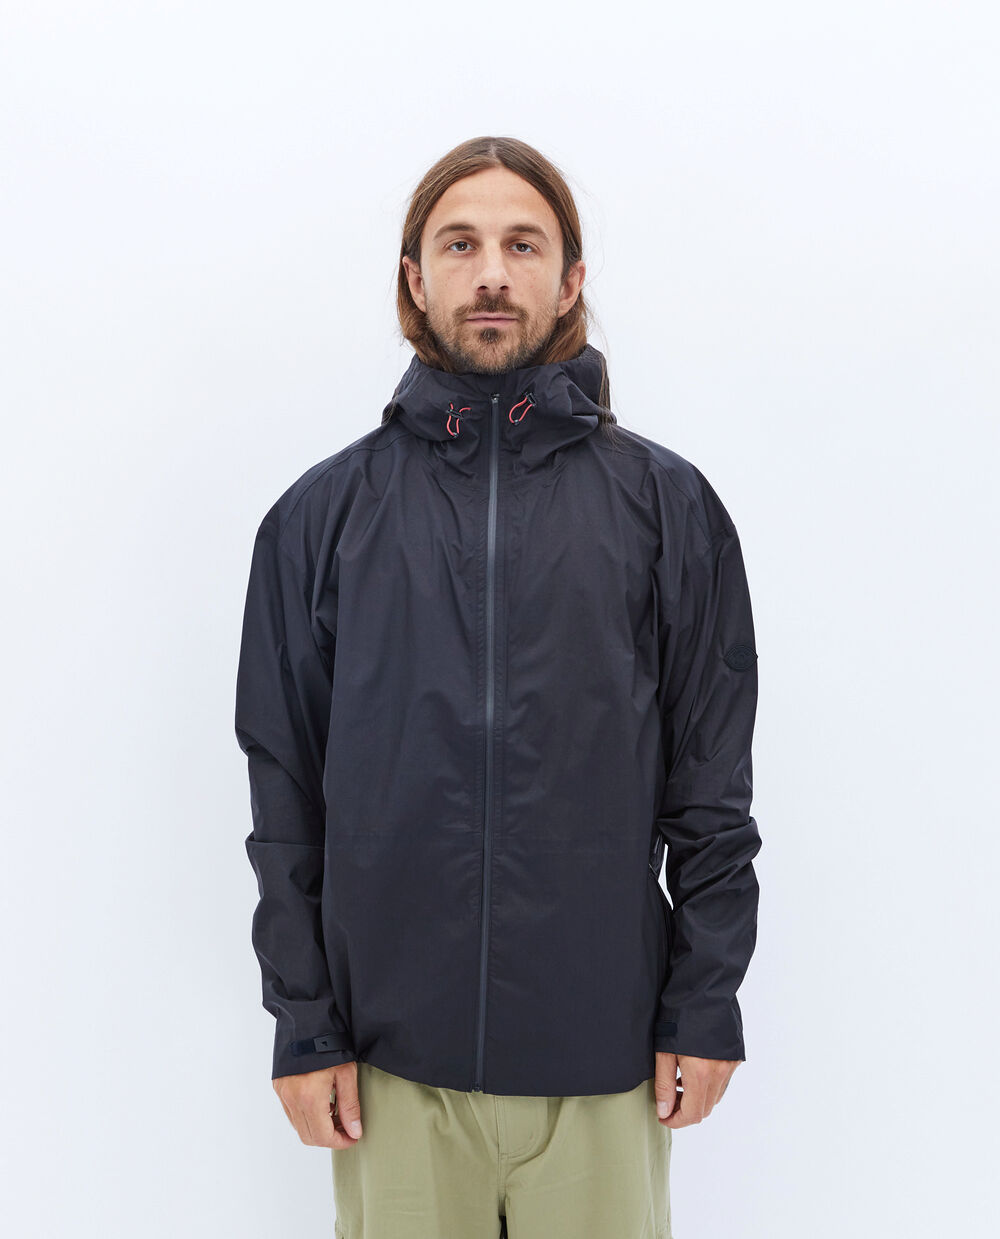 DISTRICT VISION 3-LAYER WATERPROOF MOUNTAIN SHELL